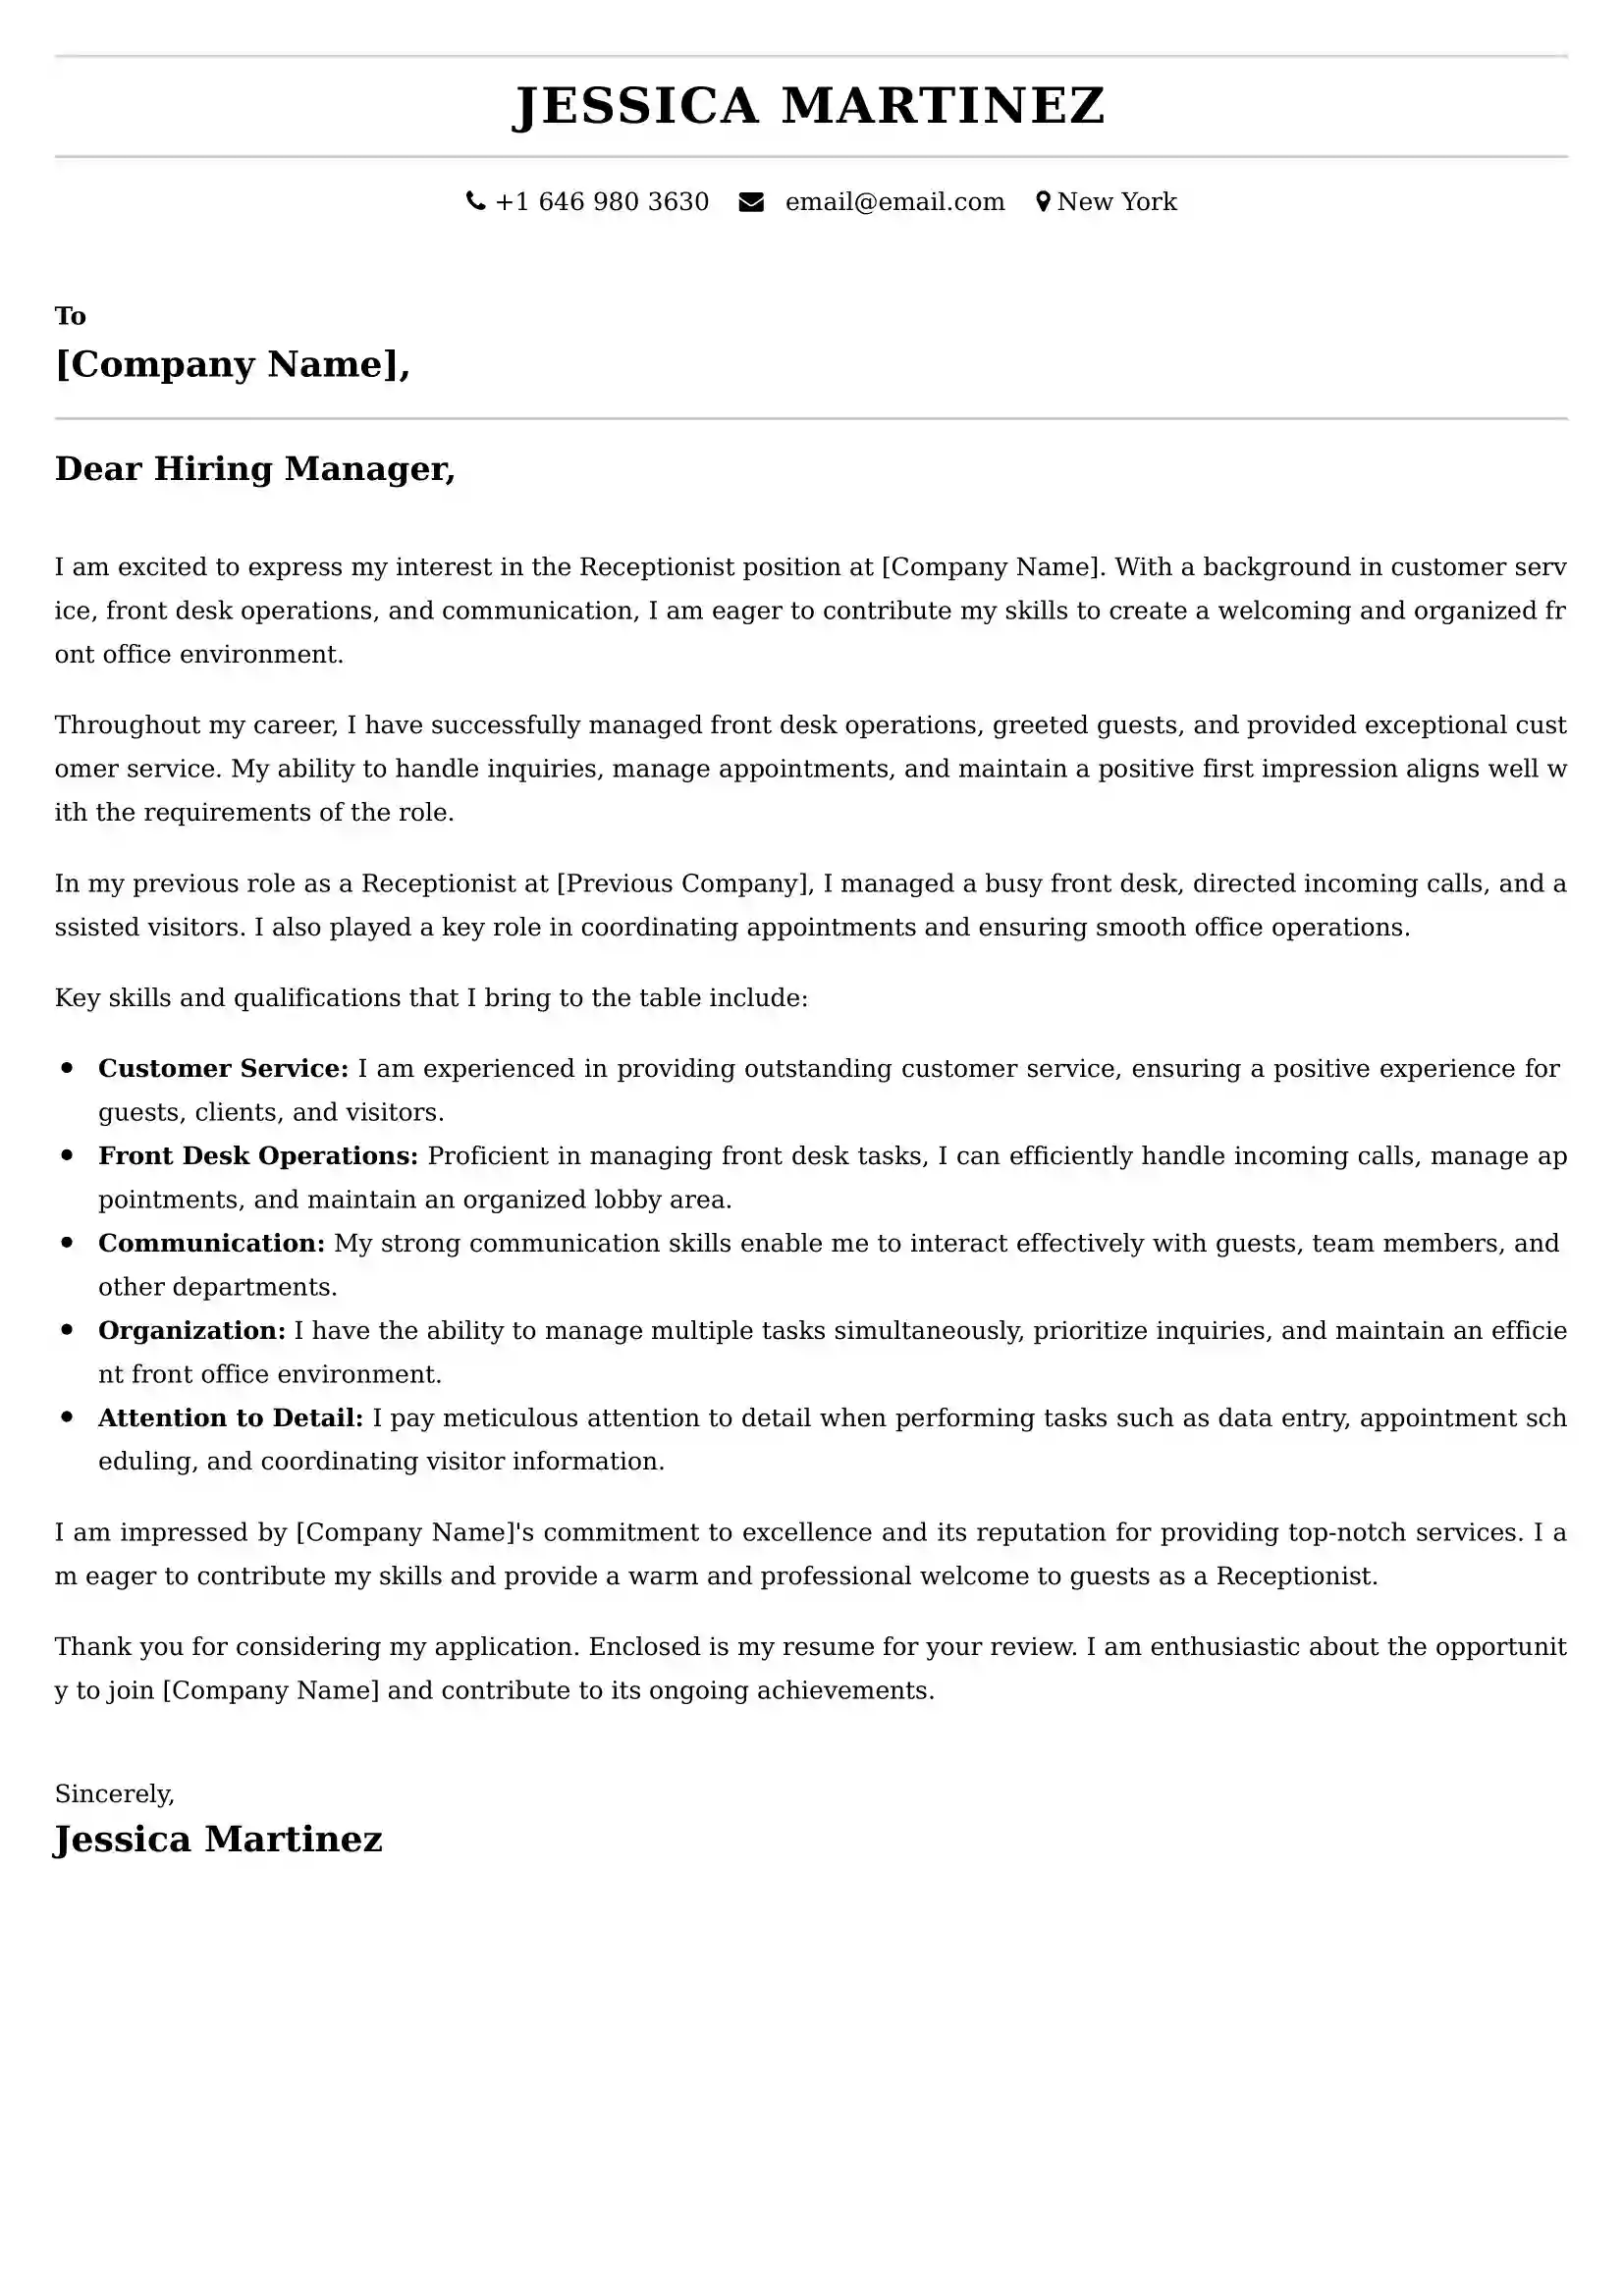 Receptionist Cover Letter Examples - Latest UK Format